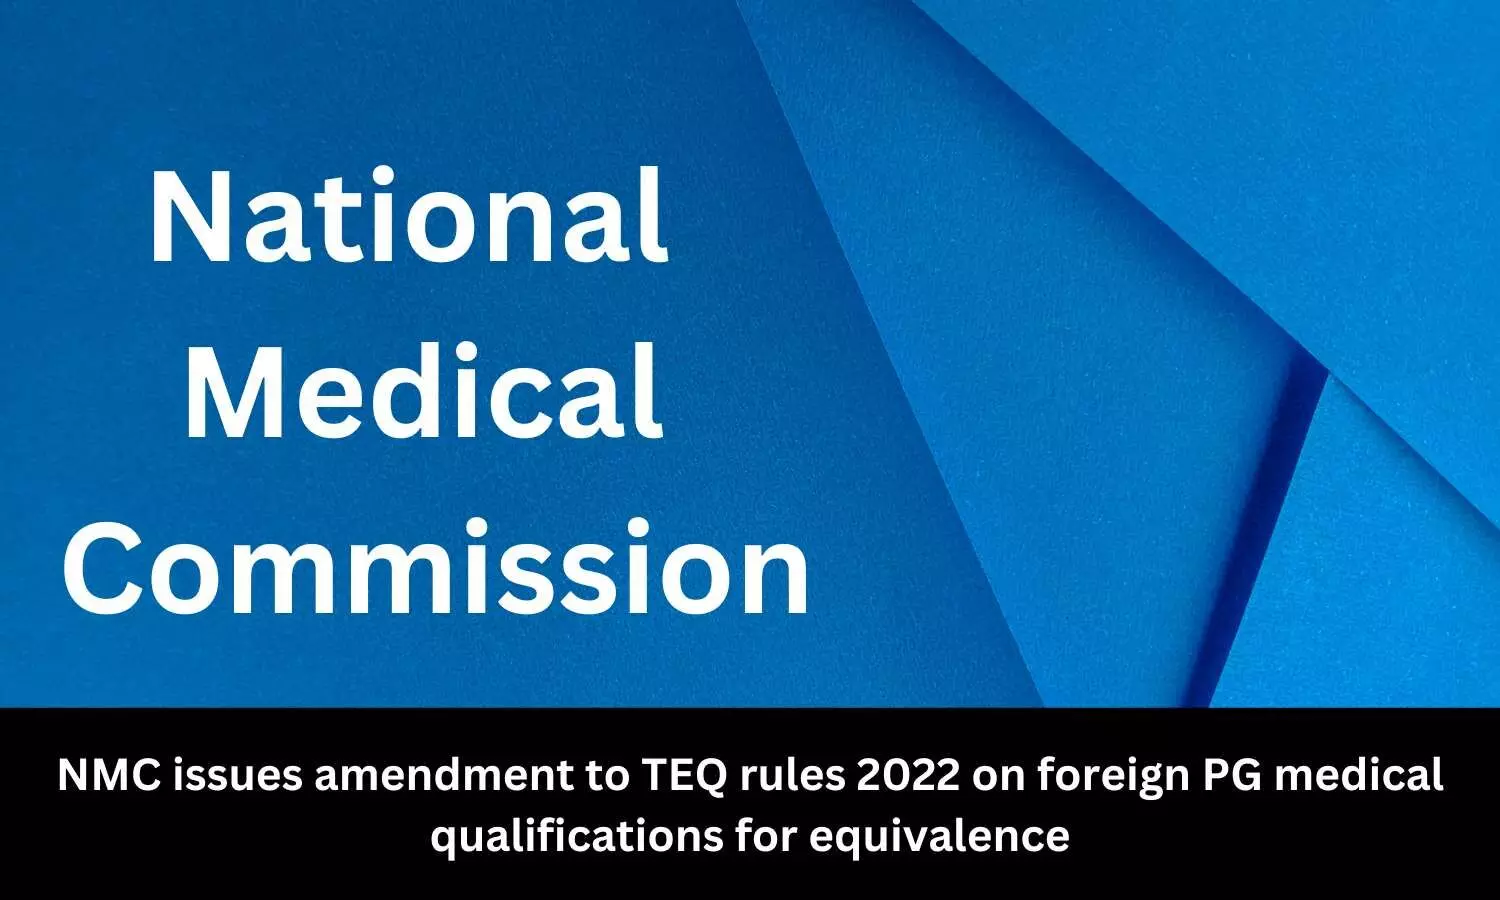 NMC issues amendment to TEQ rules 2022 on foreign PG medical qualifications for equivalence